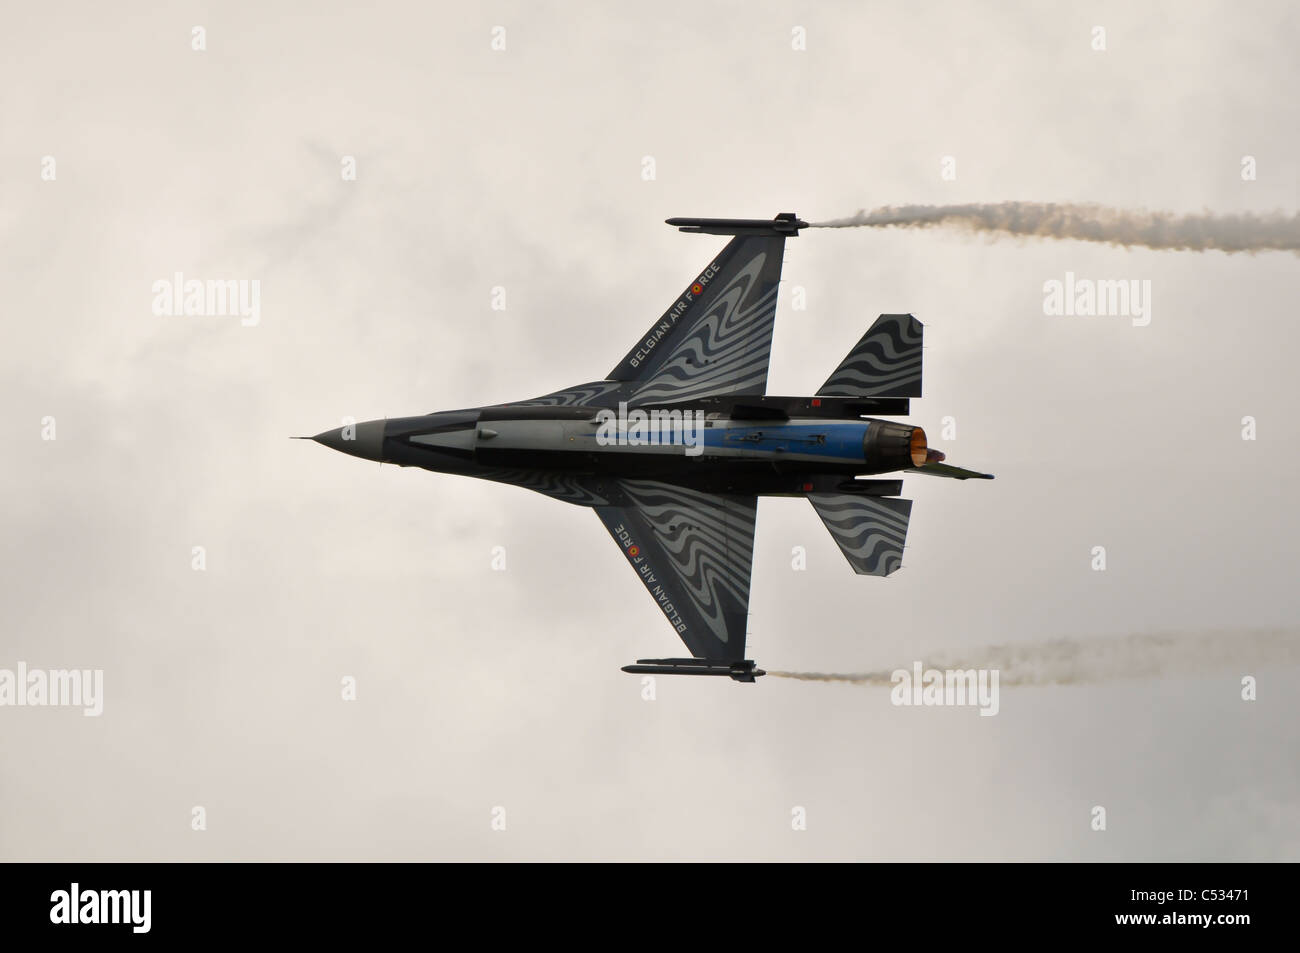 f-16 fighter jet doing aerobatics at an airshow Stock Photo